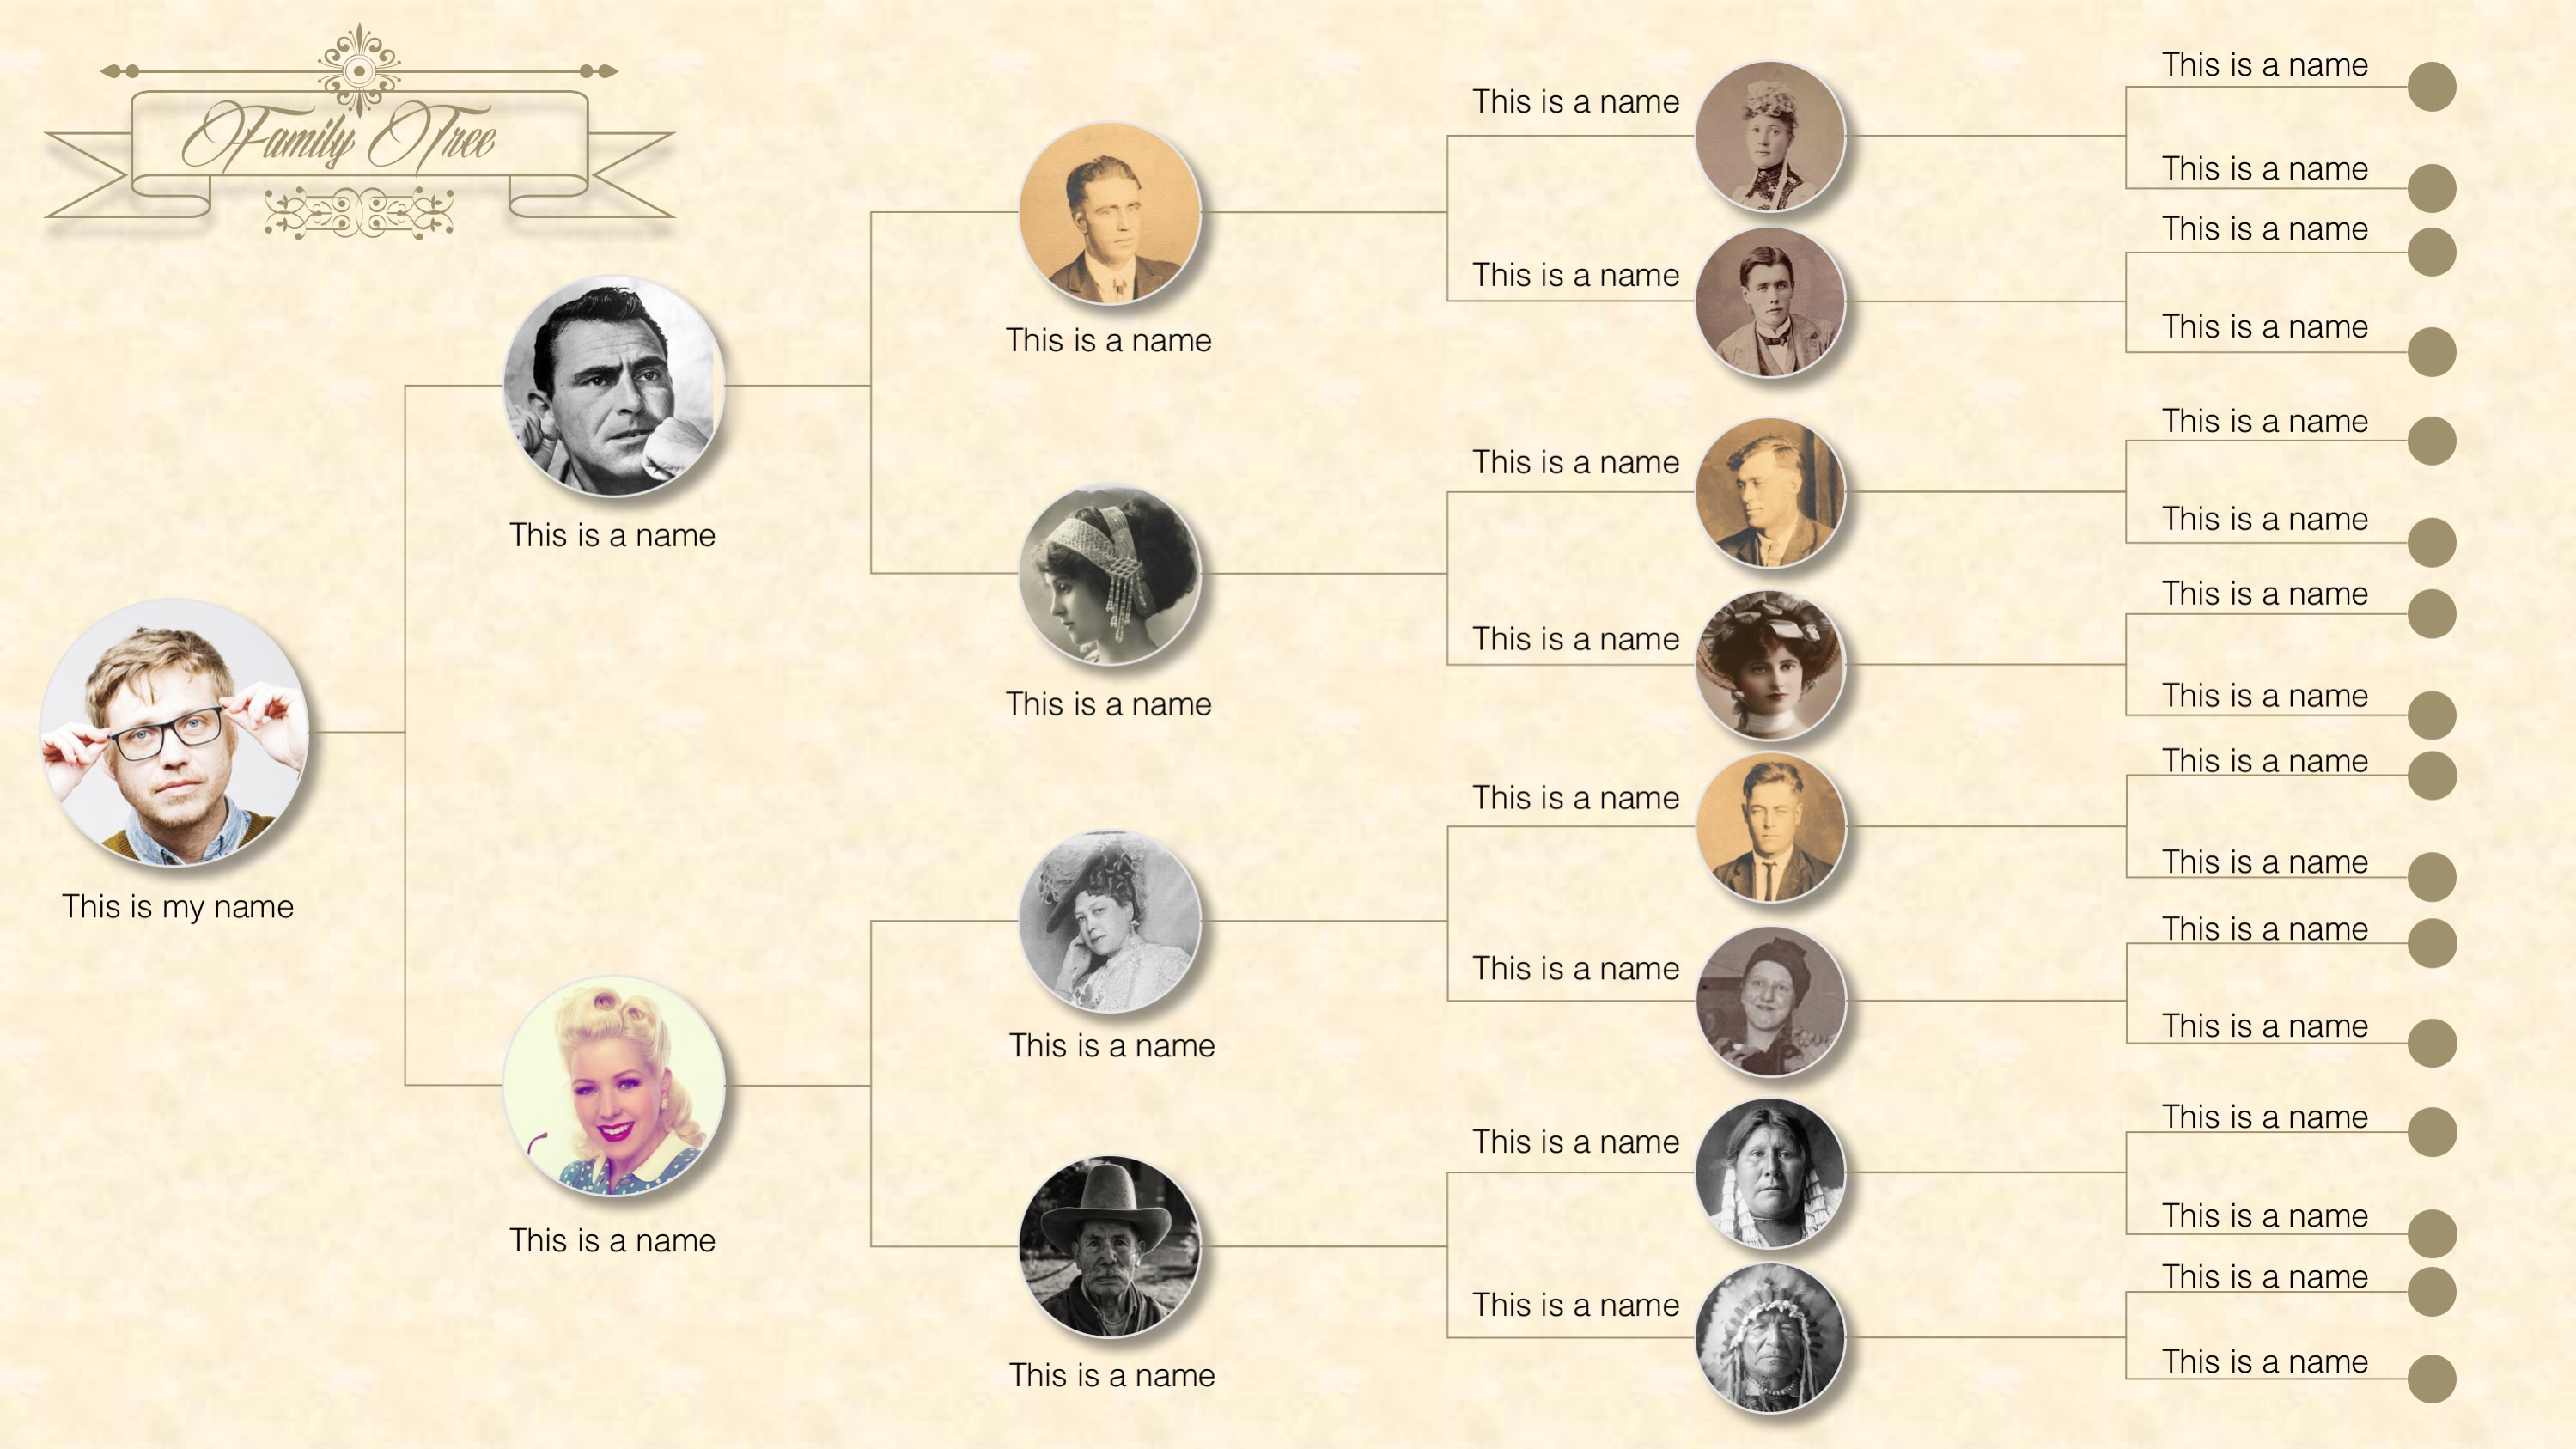 Family Tree Powerpoint Templates In Powerpoint Genealogy Template